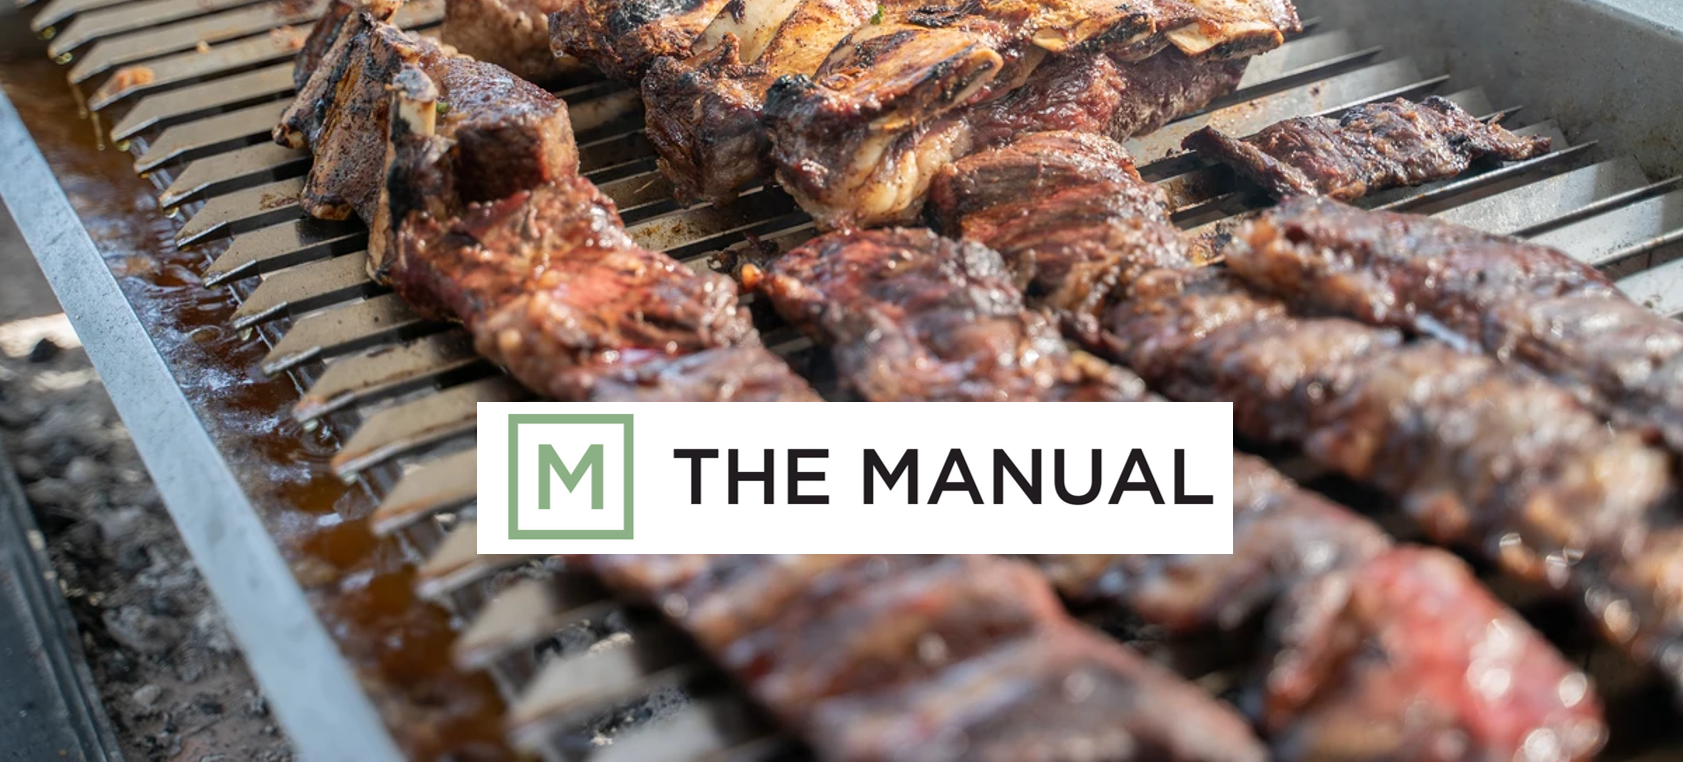 TheManual.com: The Ultimate Guide To Argentinian Barbecue, a Parade of Slow-Roasted Meats